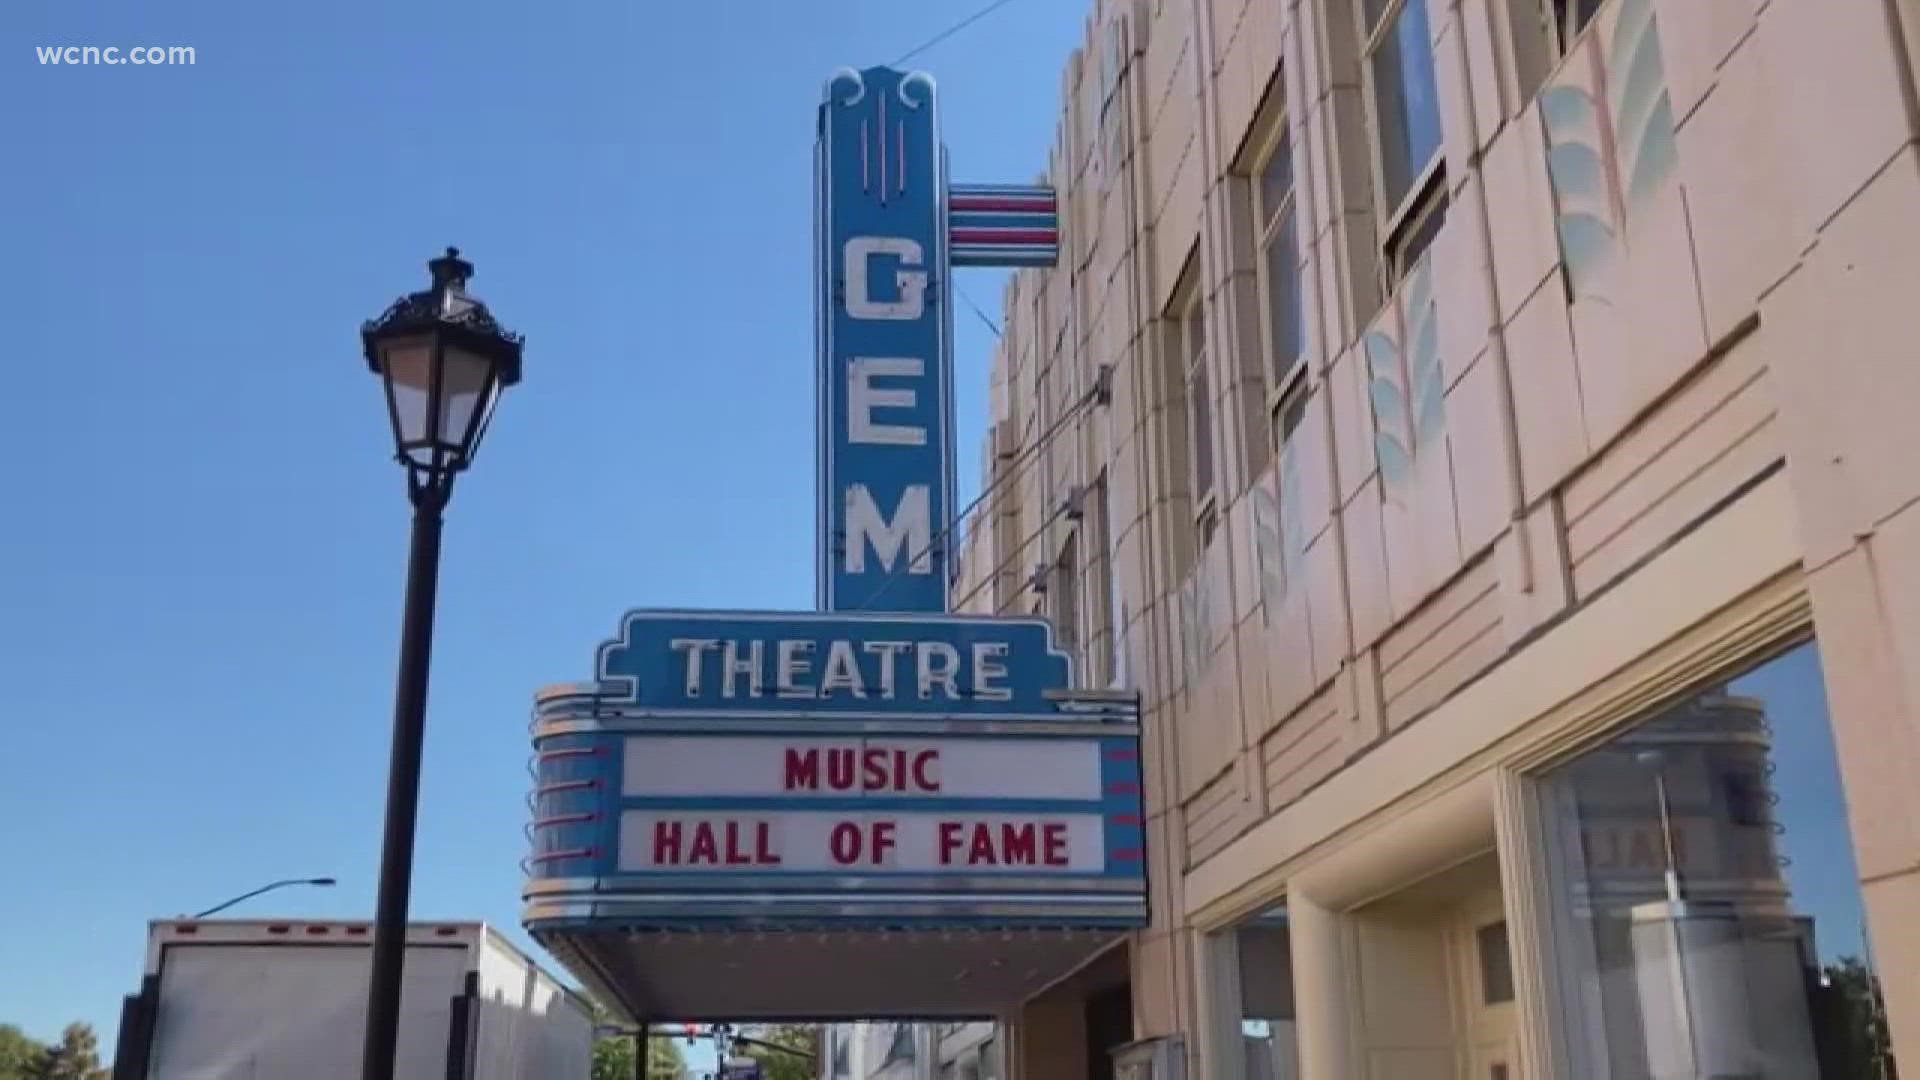 The North Carolina Music Hall of Fame will induct 10 artists this week, including hip-hop icon Jermaine Dupri and record label executive Charles Whitfield.